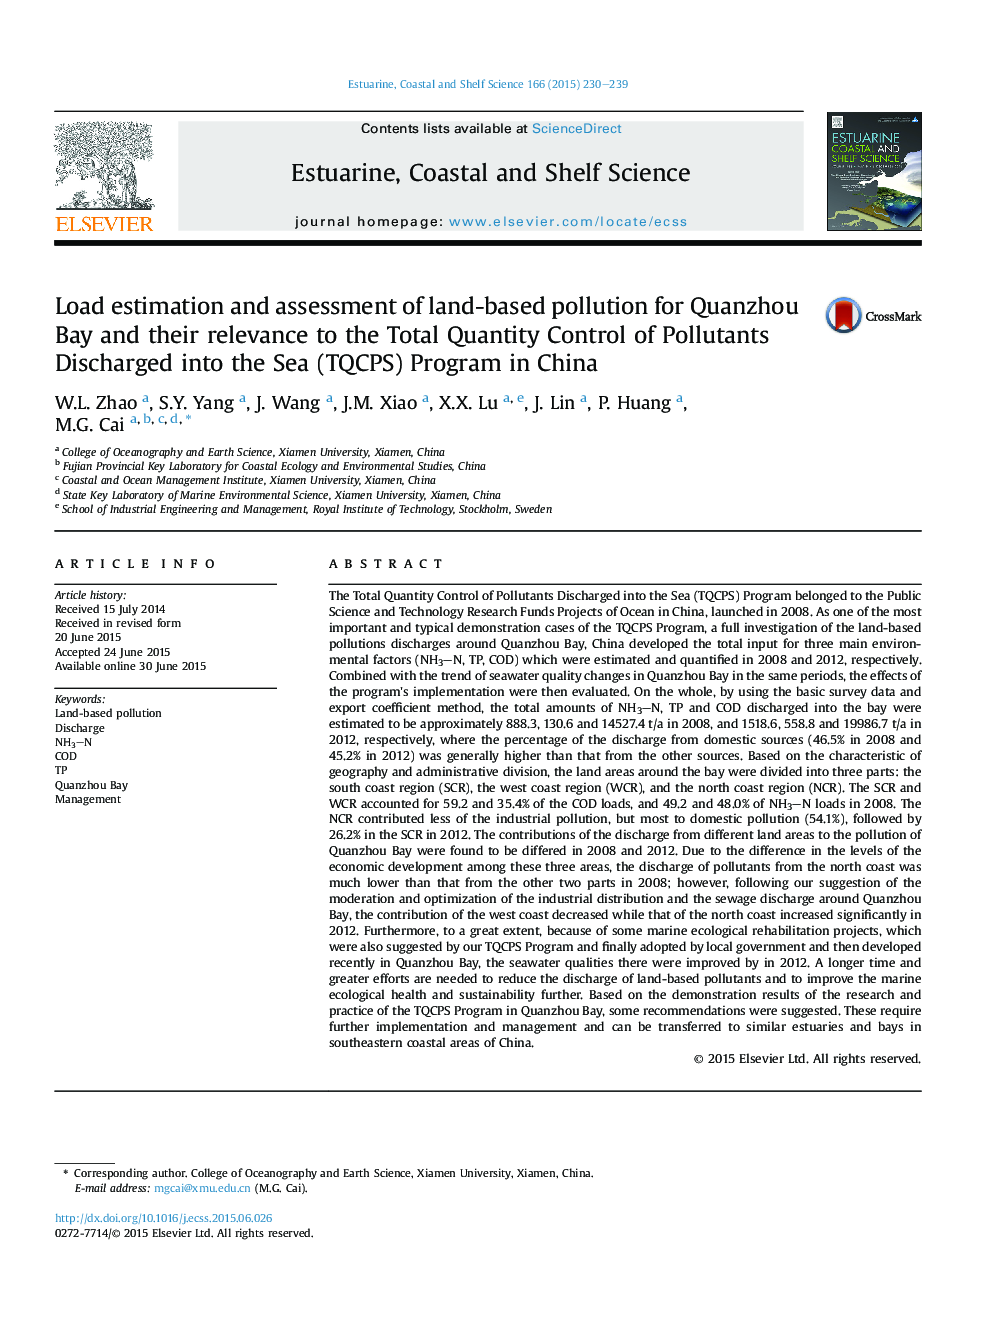 Load estimation and assessment of land-based pollution for Quanzhou Bay and their relevance to the Total Quantity Control of Pollutants Discharged into the Sea (TQCPS) Program in China